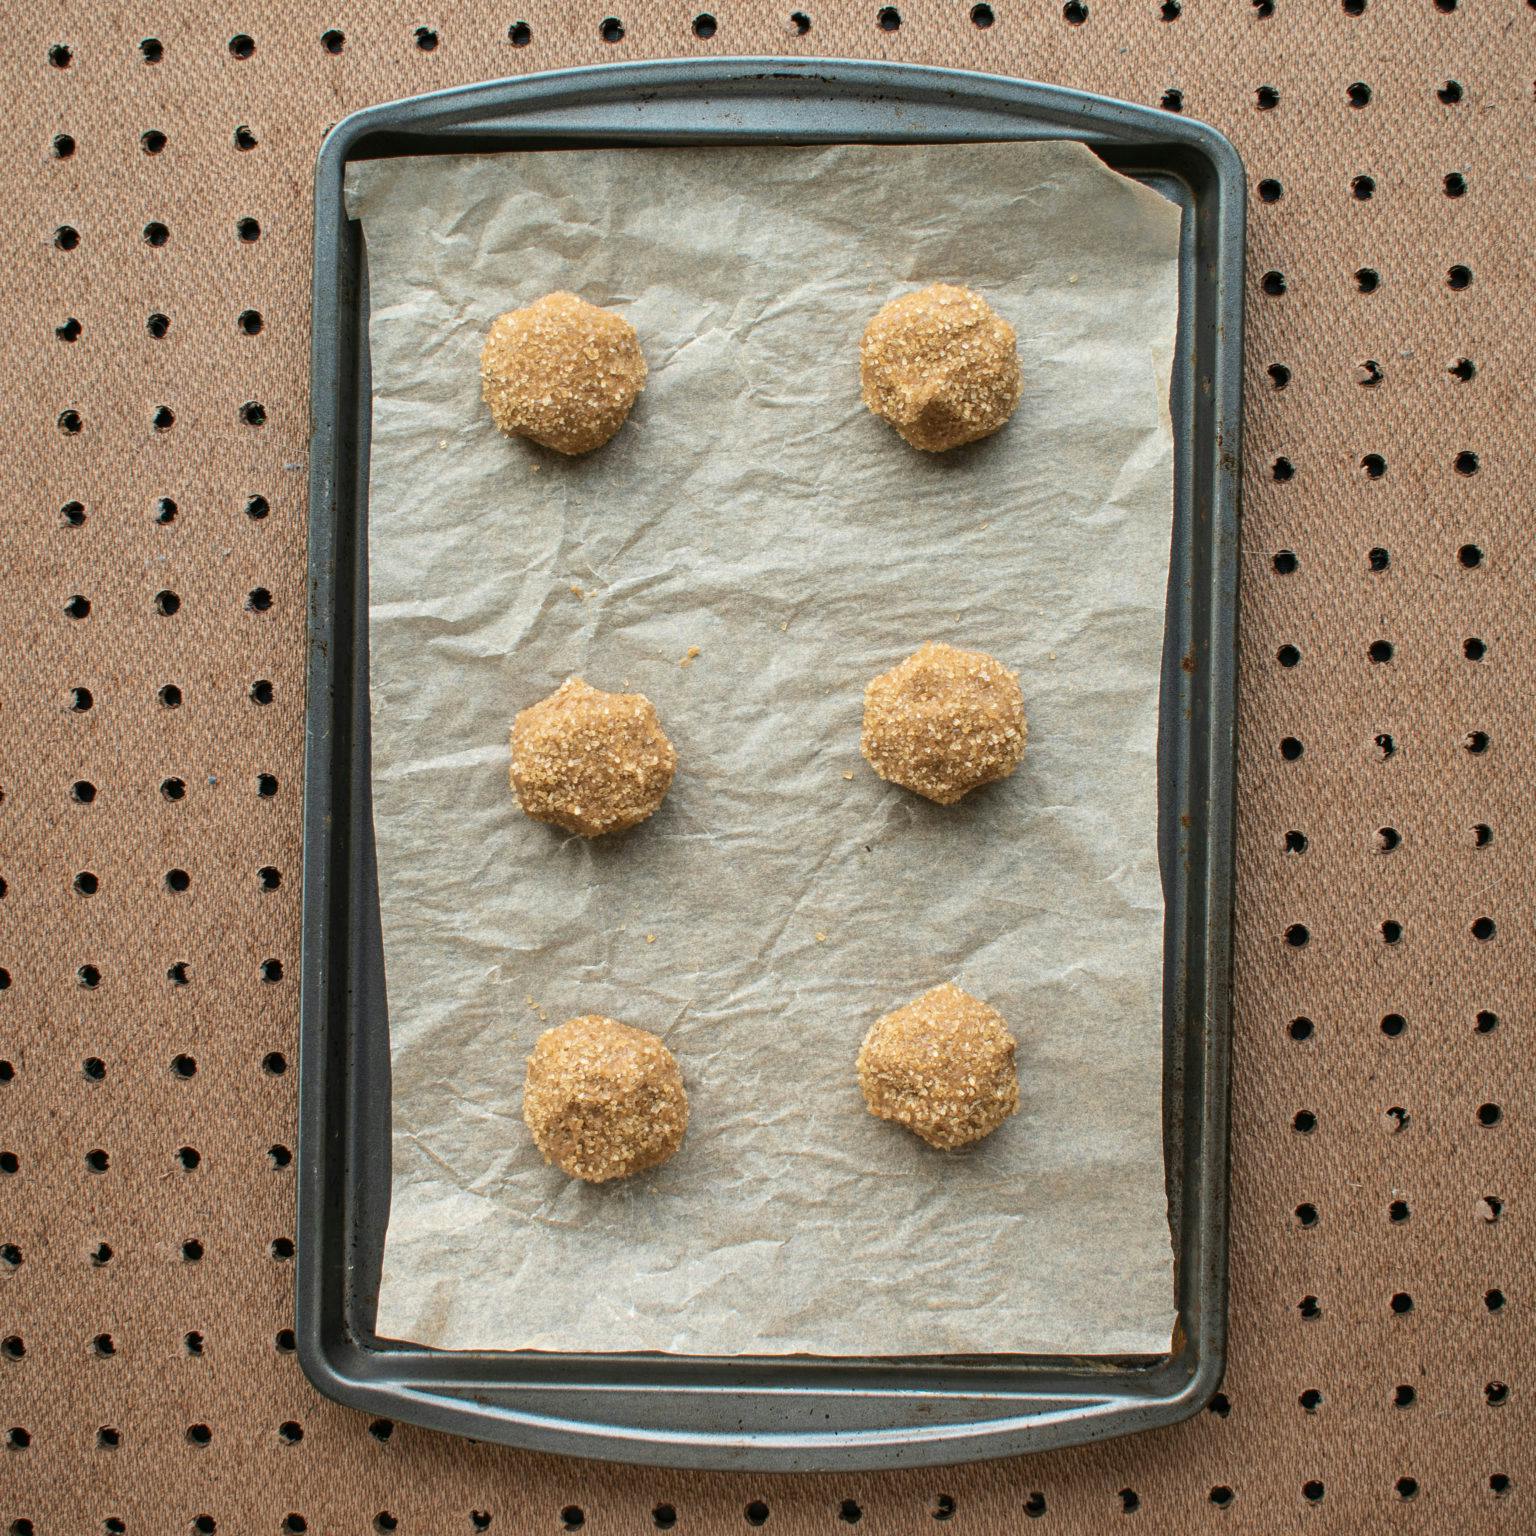 Roll balls of dough in sugar and bake